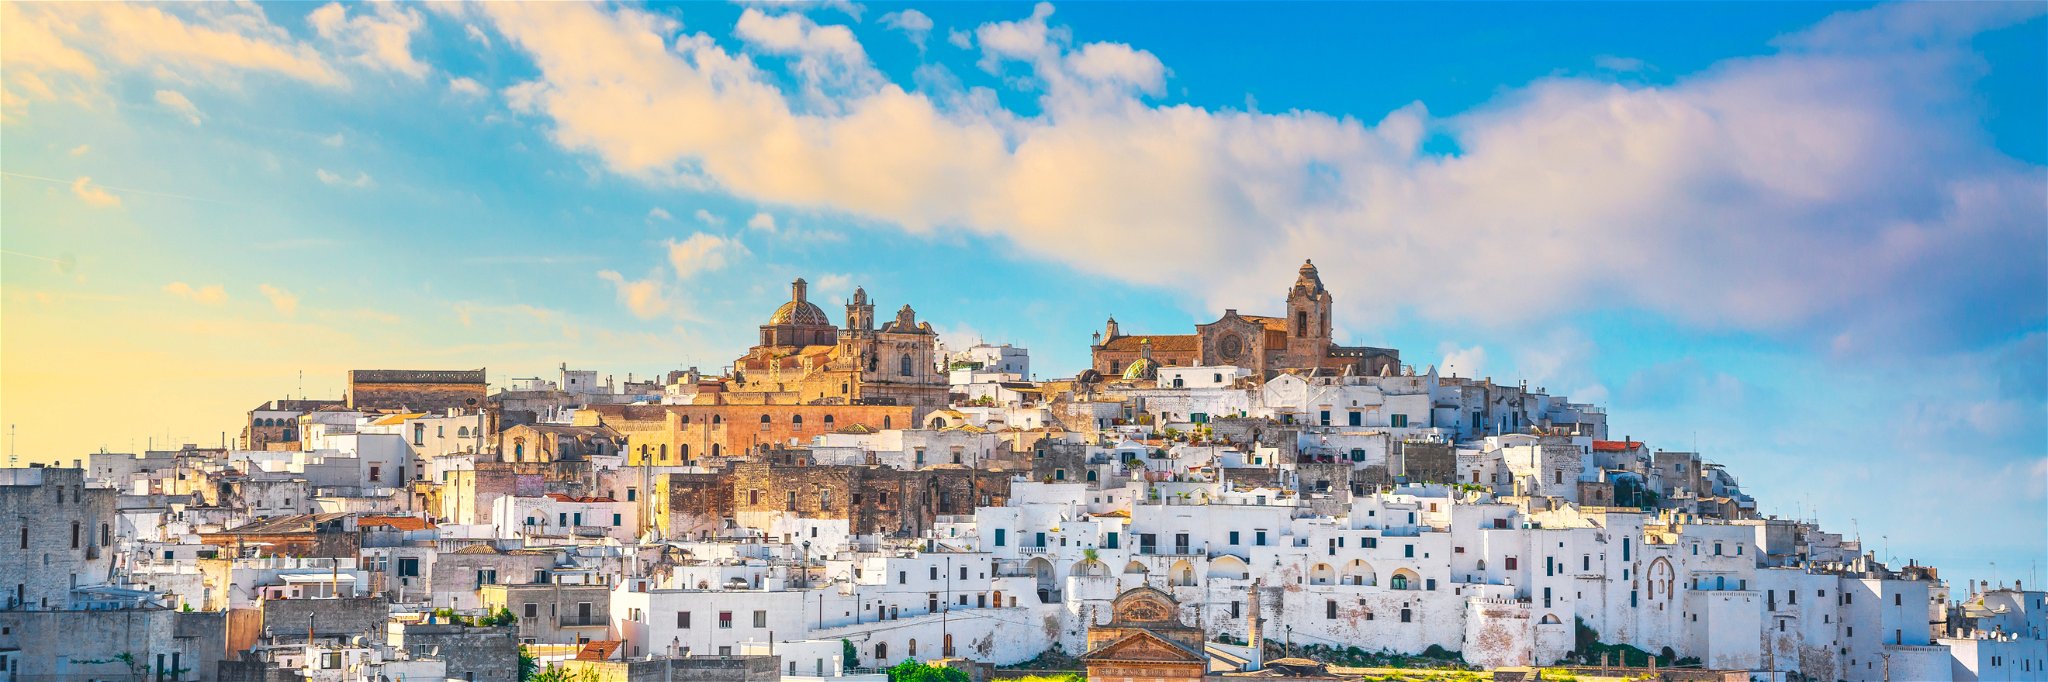 The whitewashed old town of Ostuni